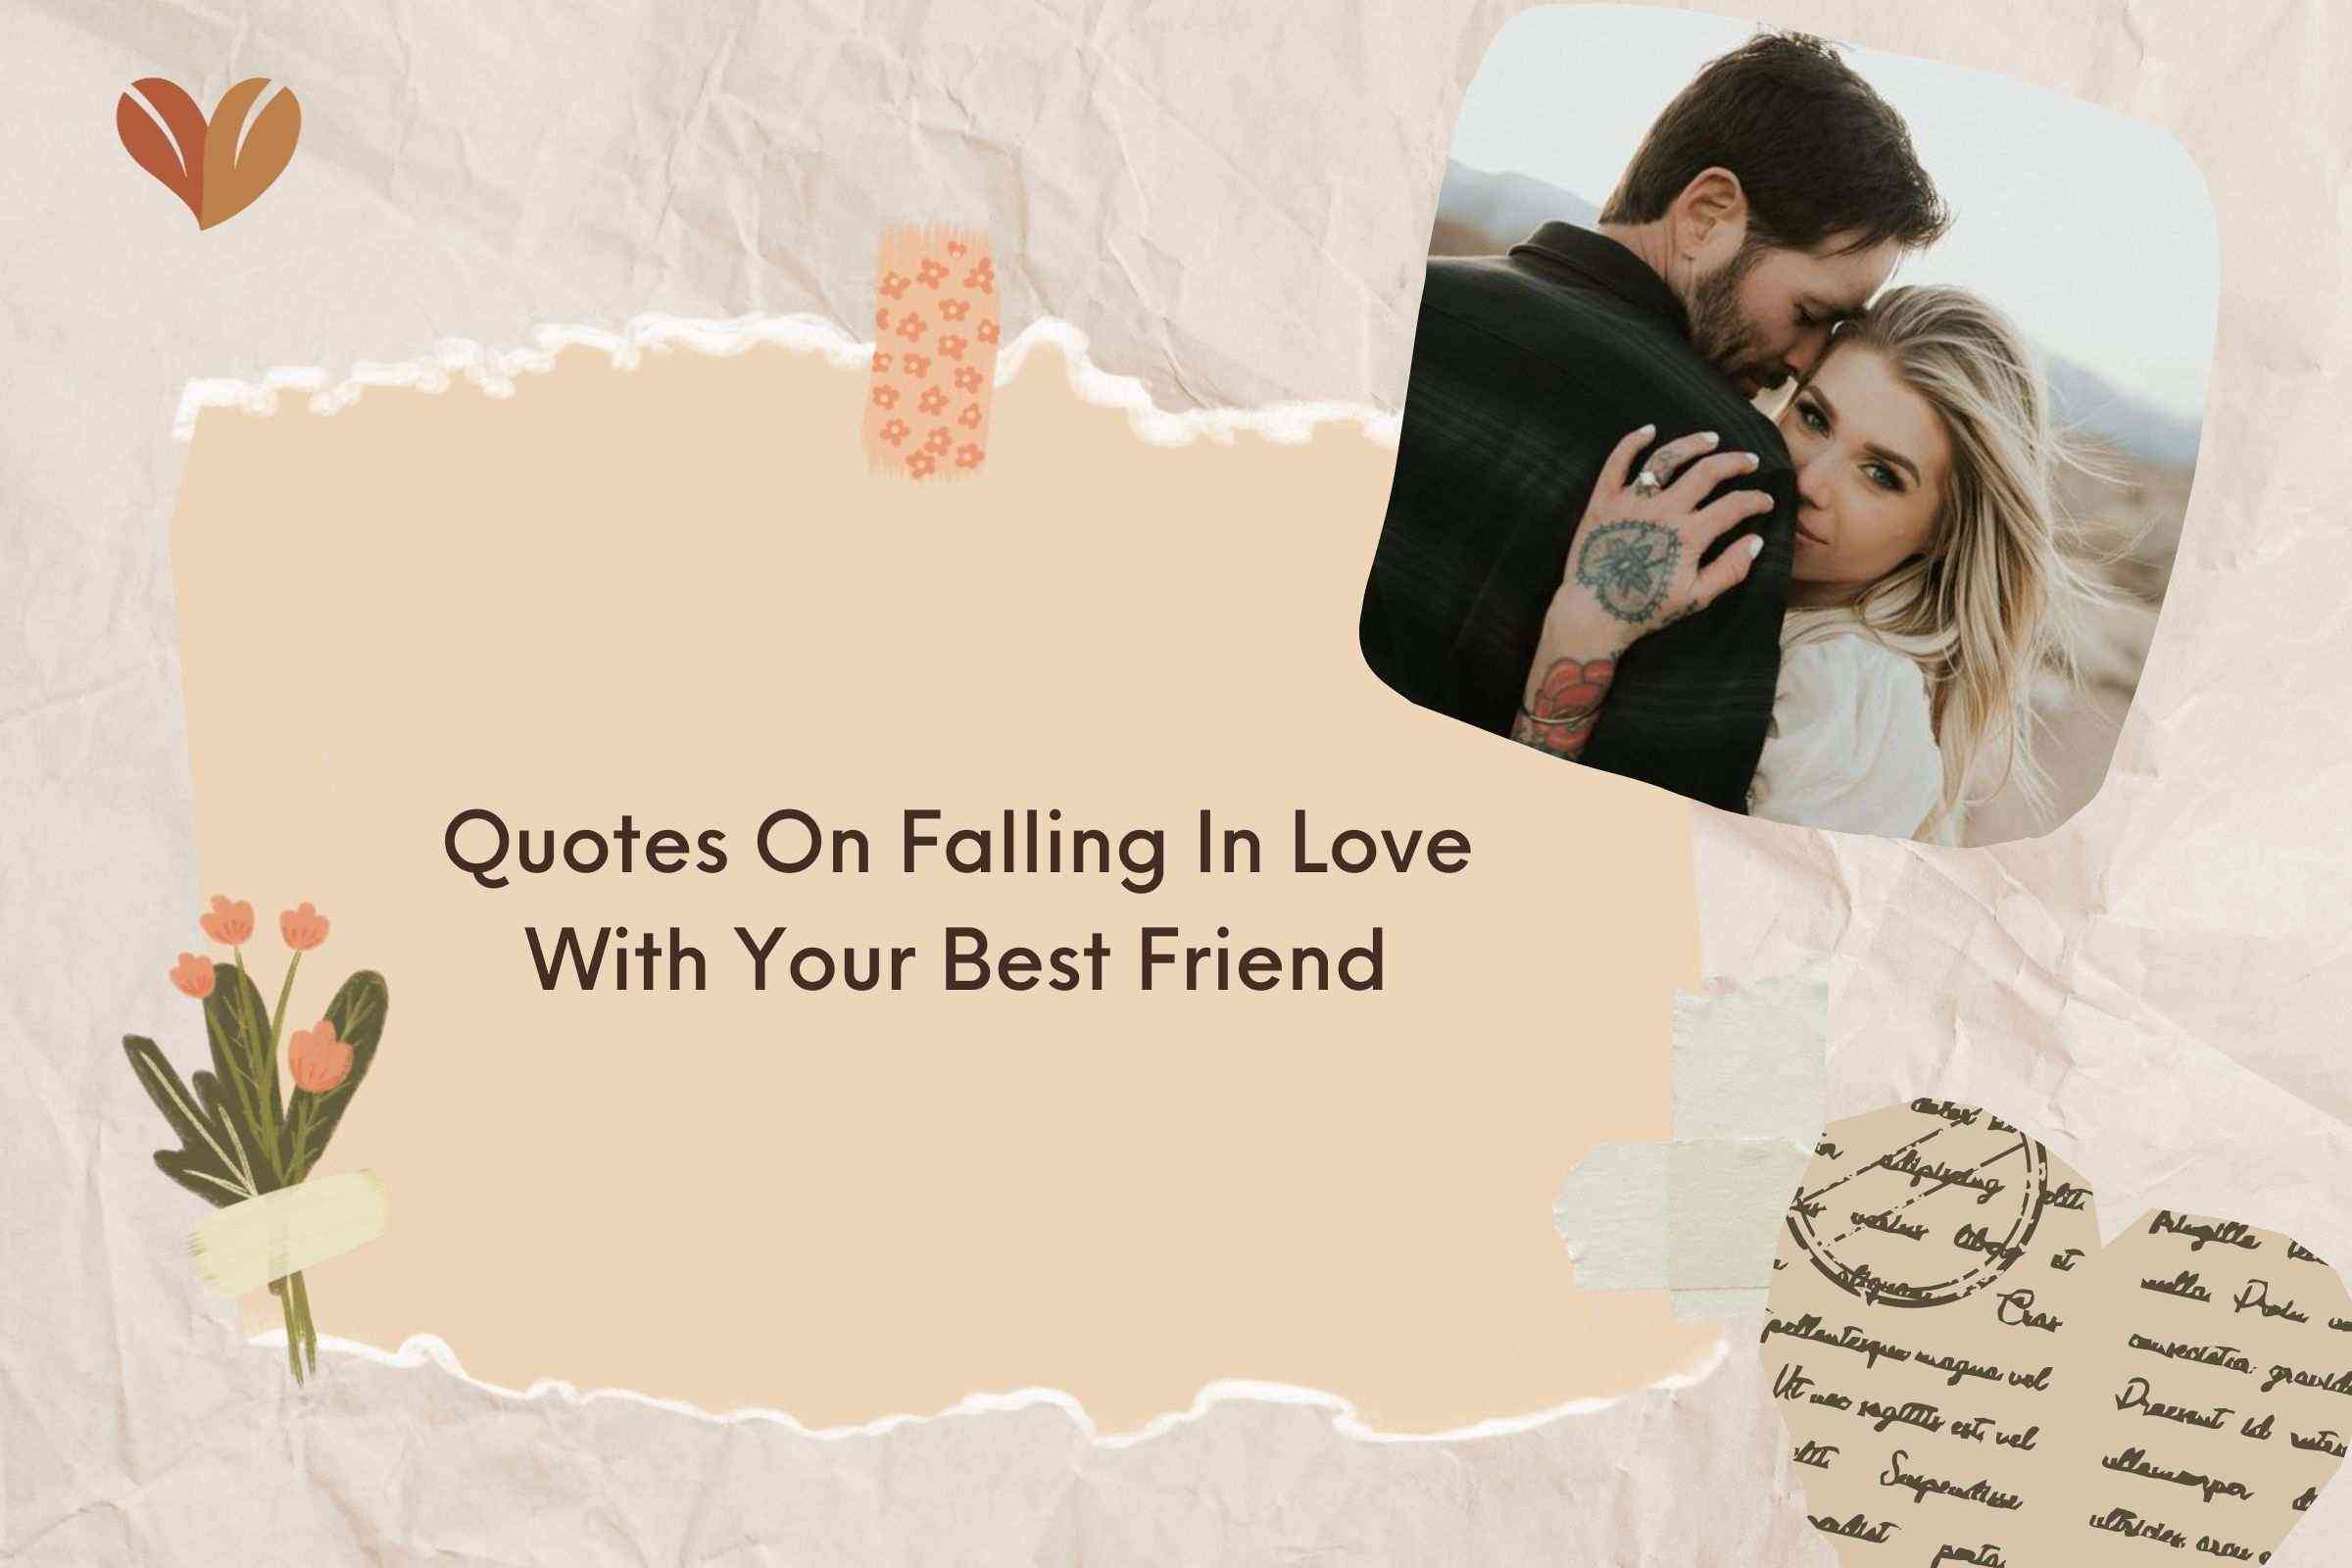 Quotes On Falling In Love With Your Best Friend